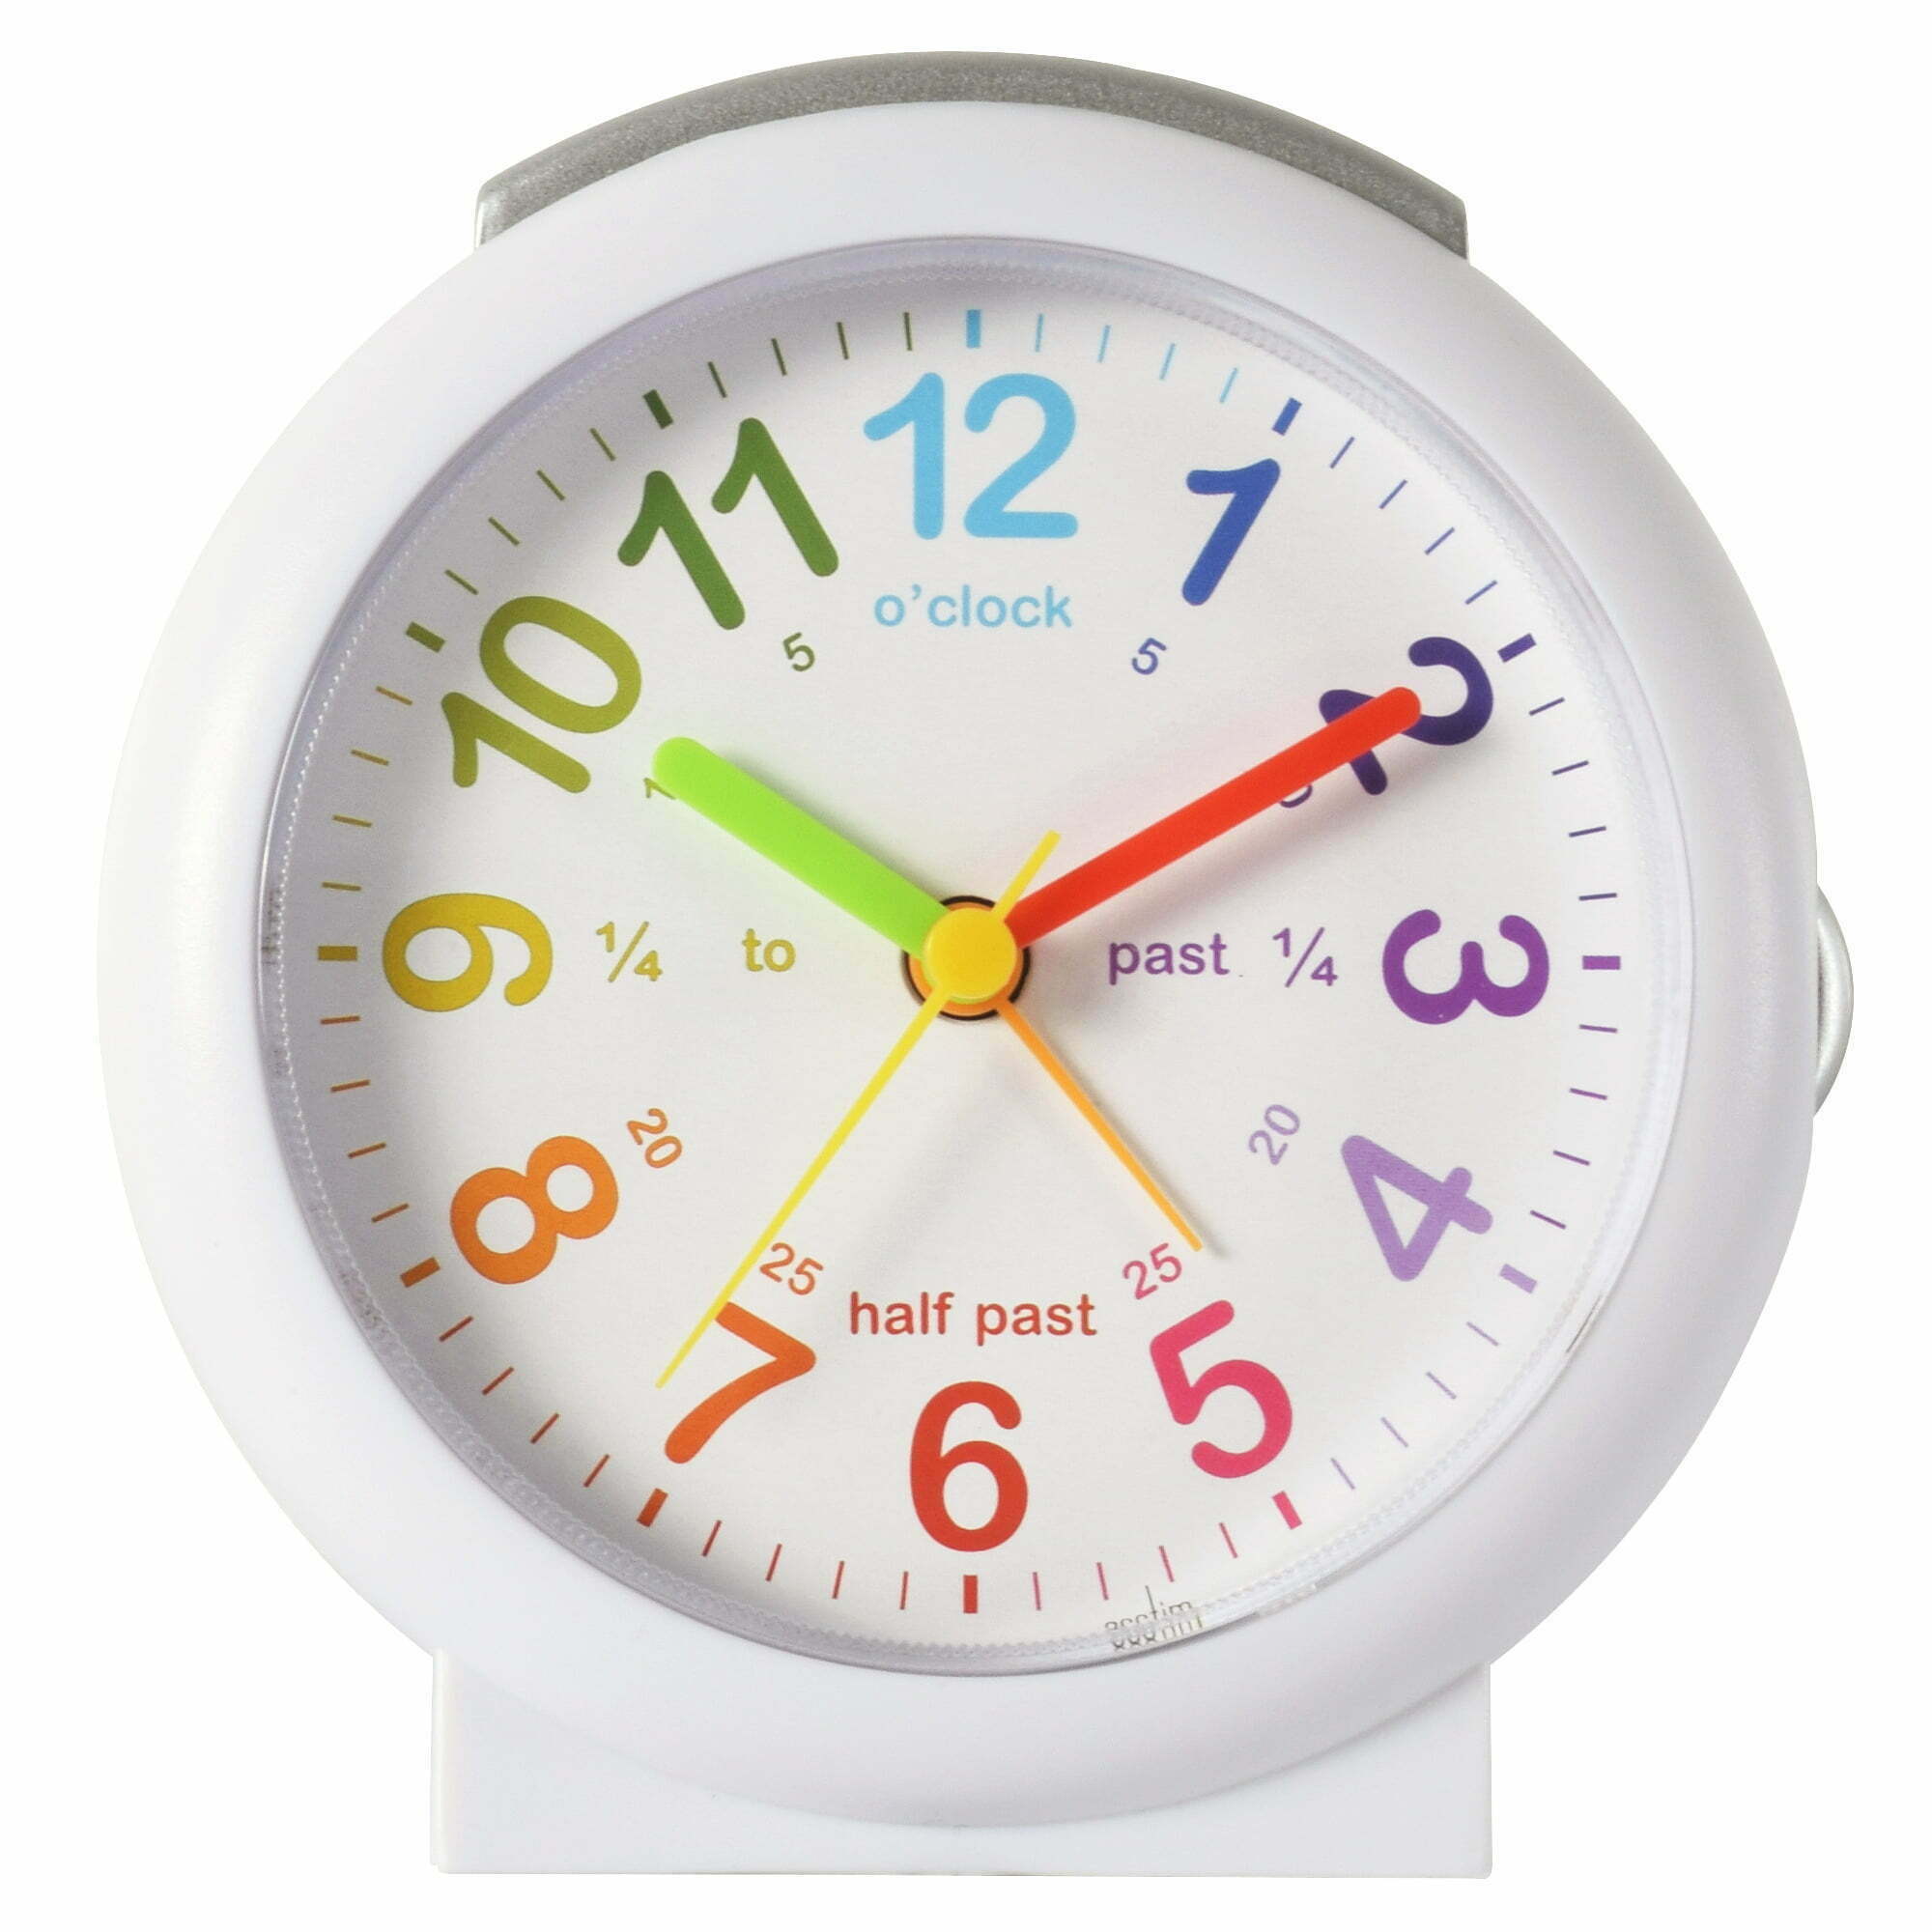 Acctim Lulu 2 Green Kids Alarm Clock Non-Ticking Colour Face Learn To Tell Time 